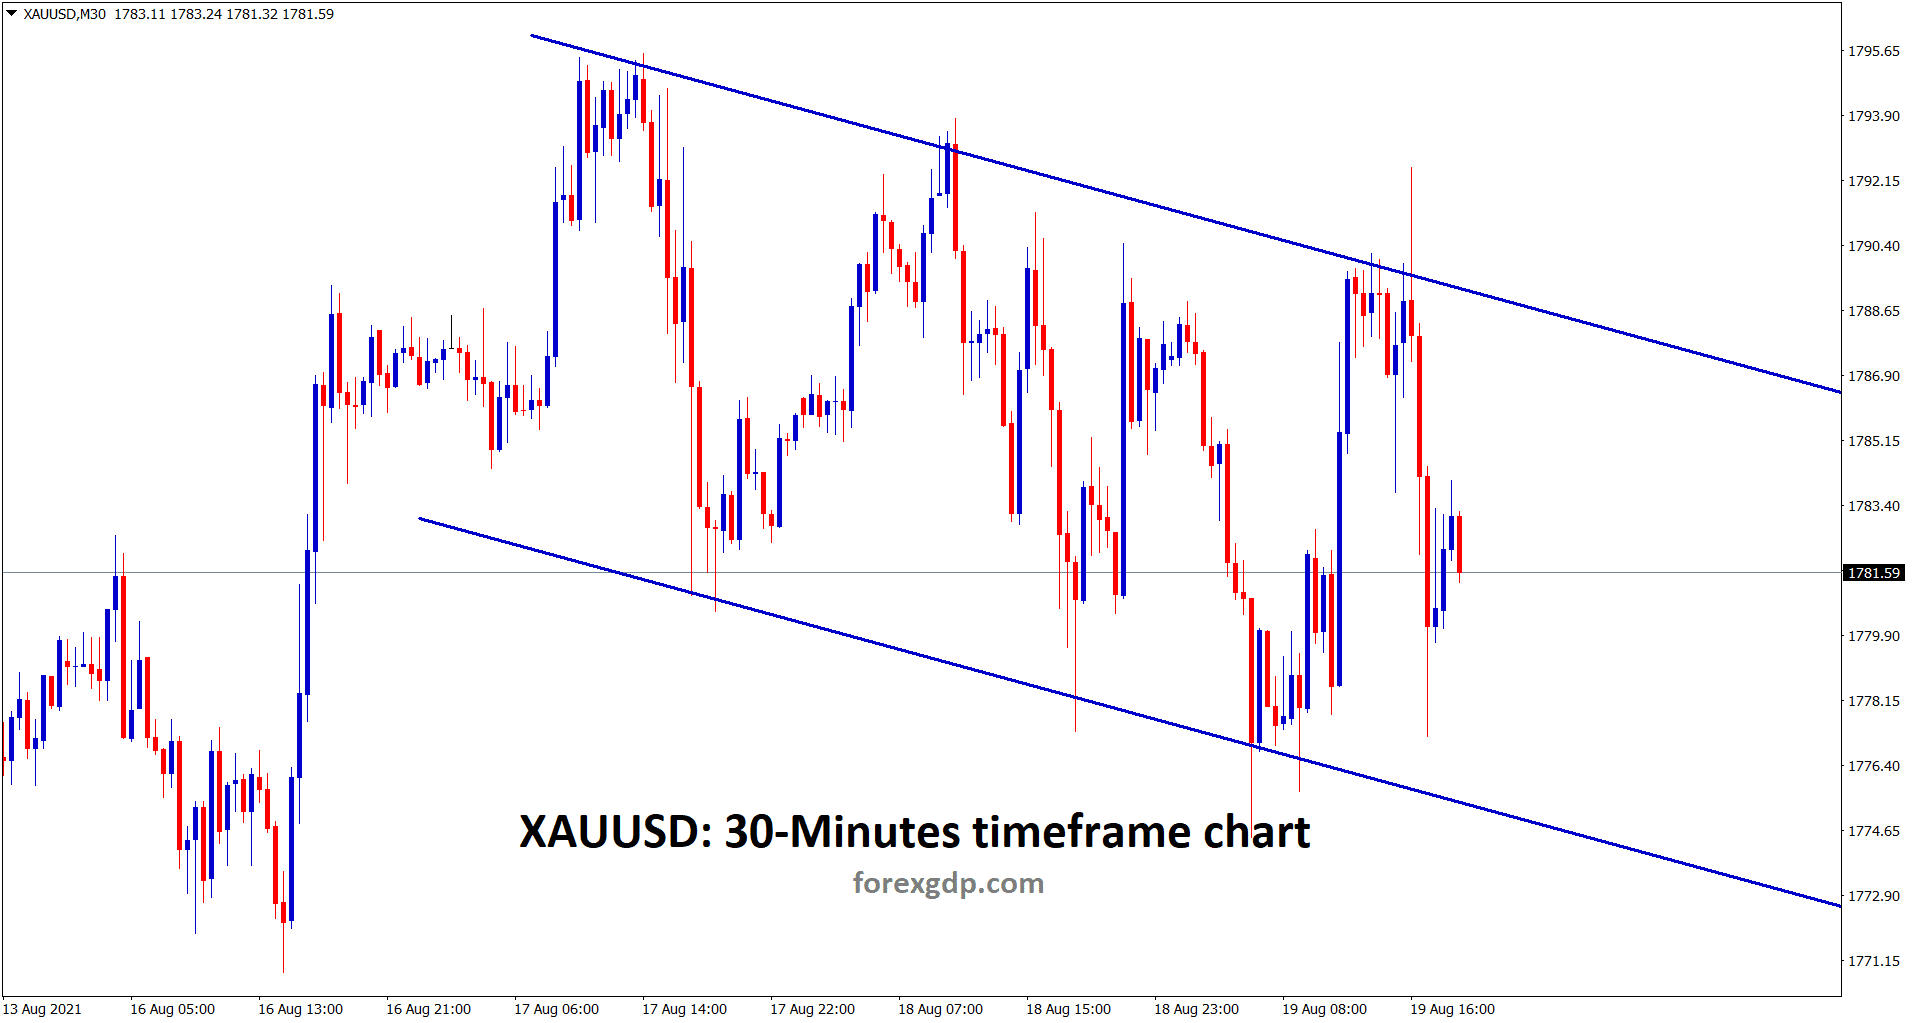 Gold is moving up and down between the channel range wait for the confirmation of breakout from this channel